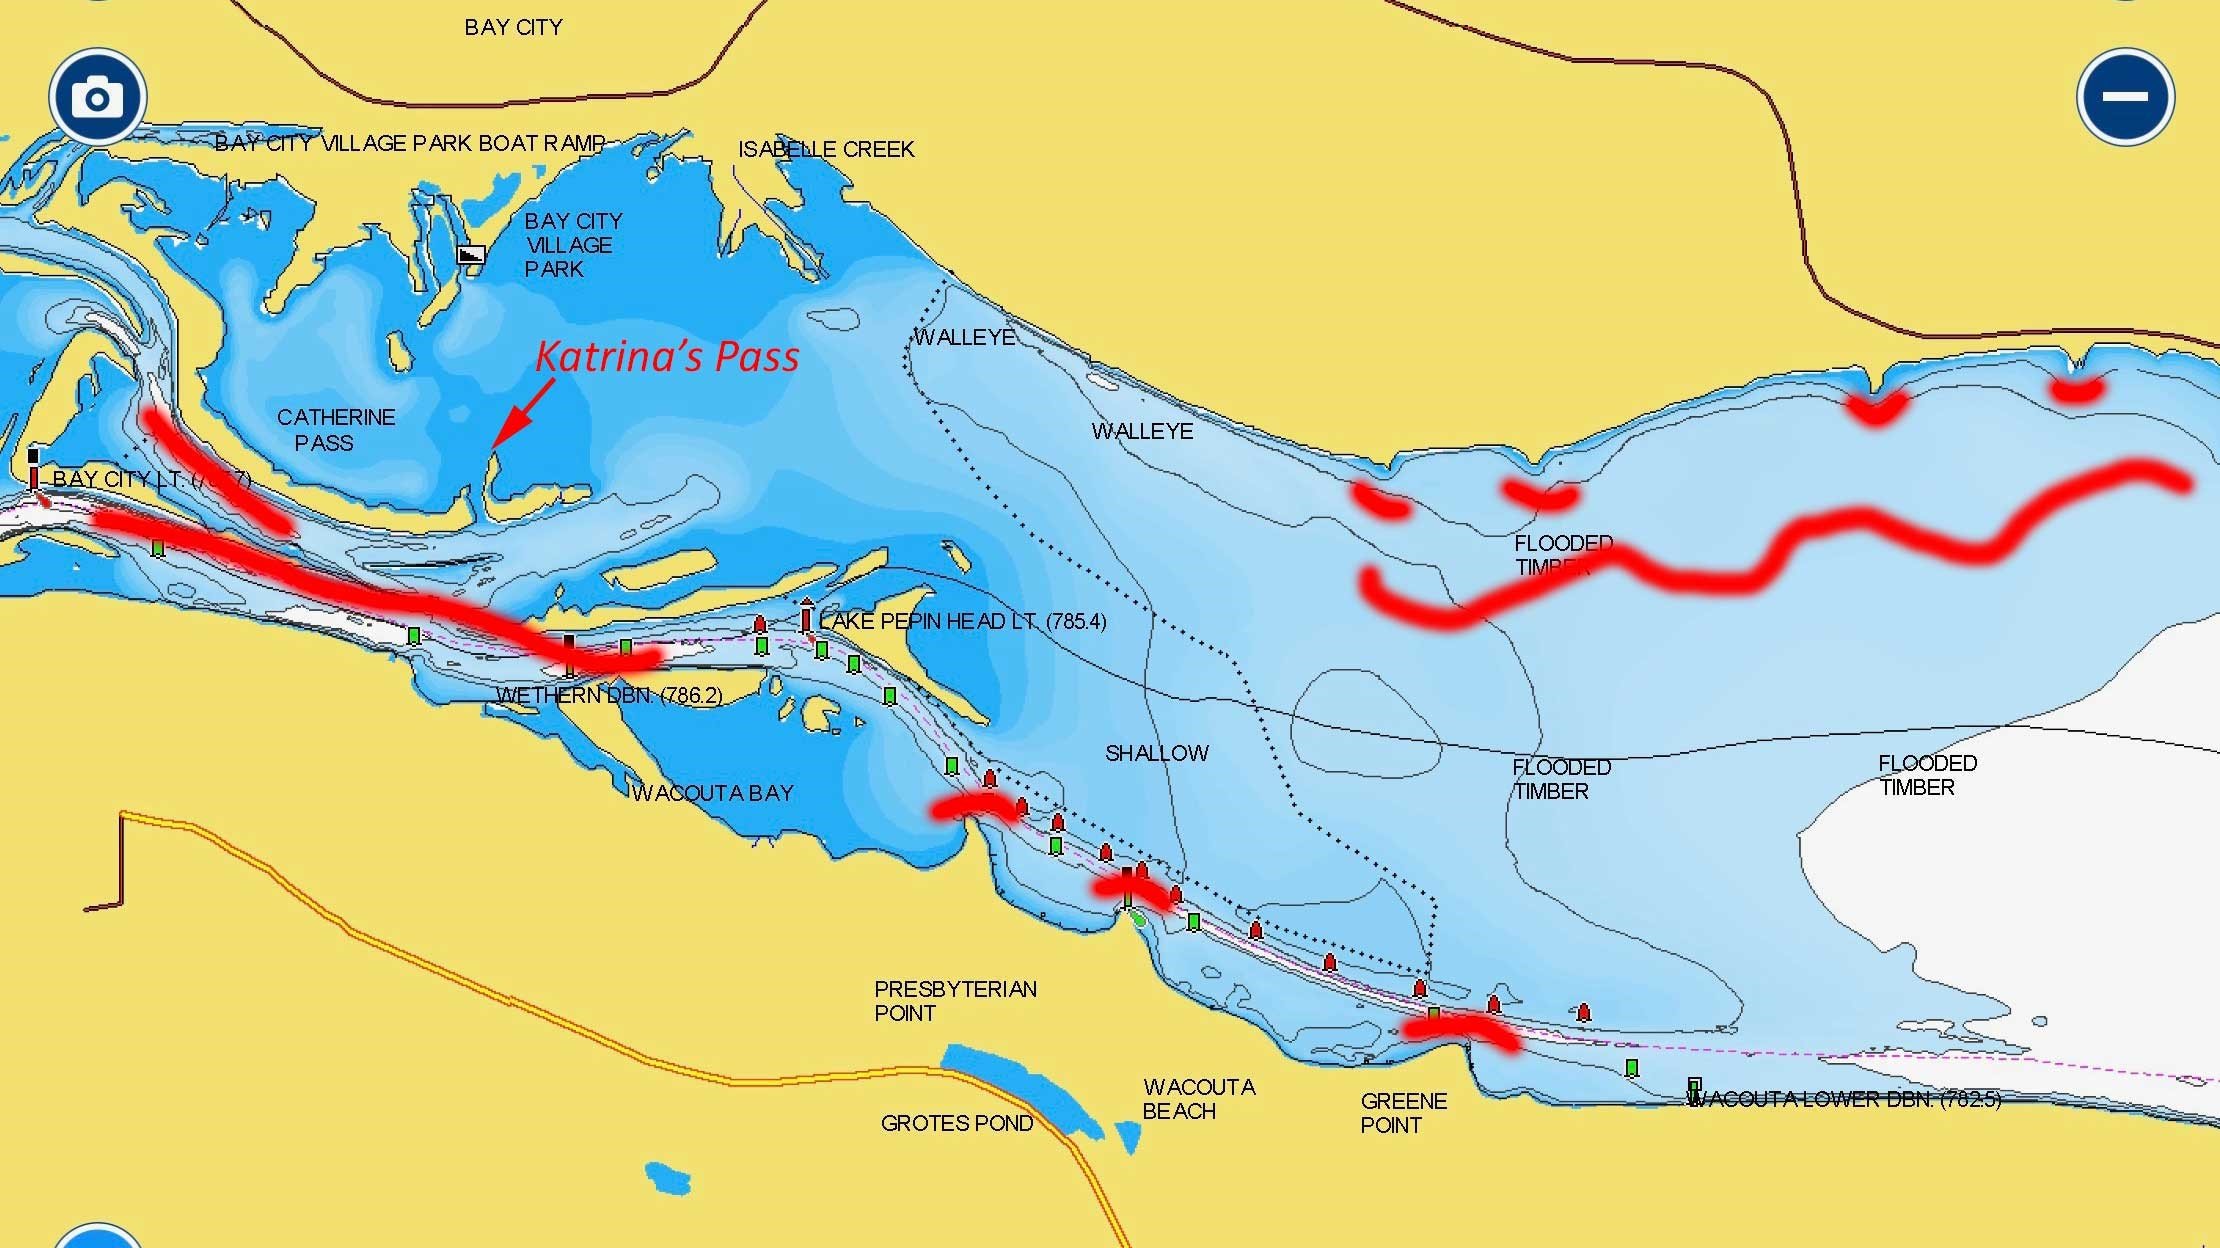 Northern section of Lake Pepin, with fishing spots marked on lake map.